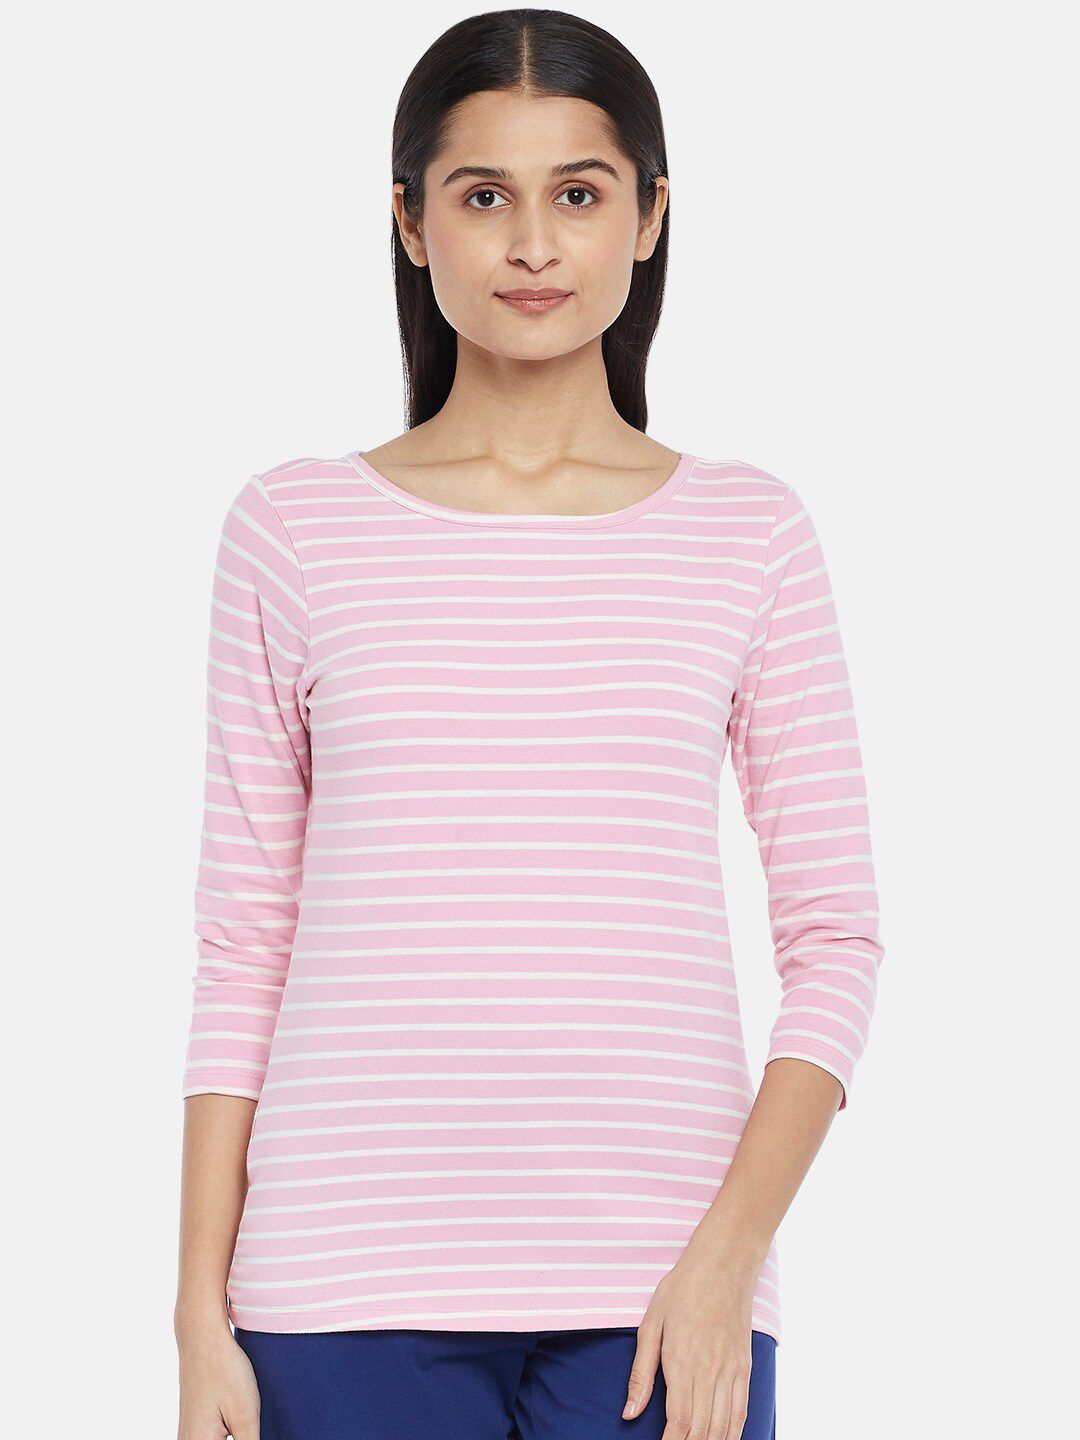 Dreamz by Pantaloons Pink & White Striped Lounge tshirt Price in India